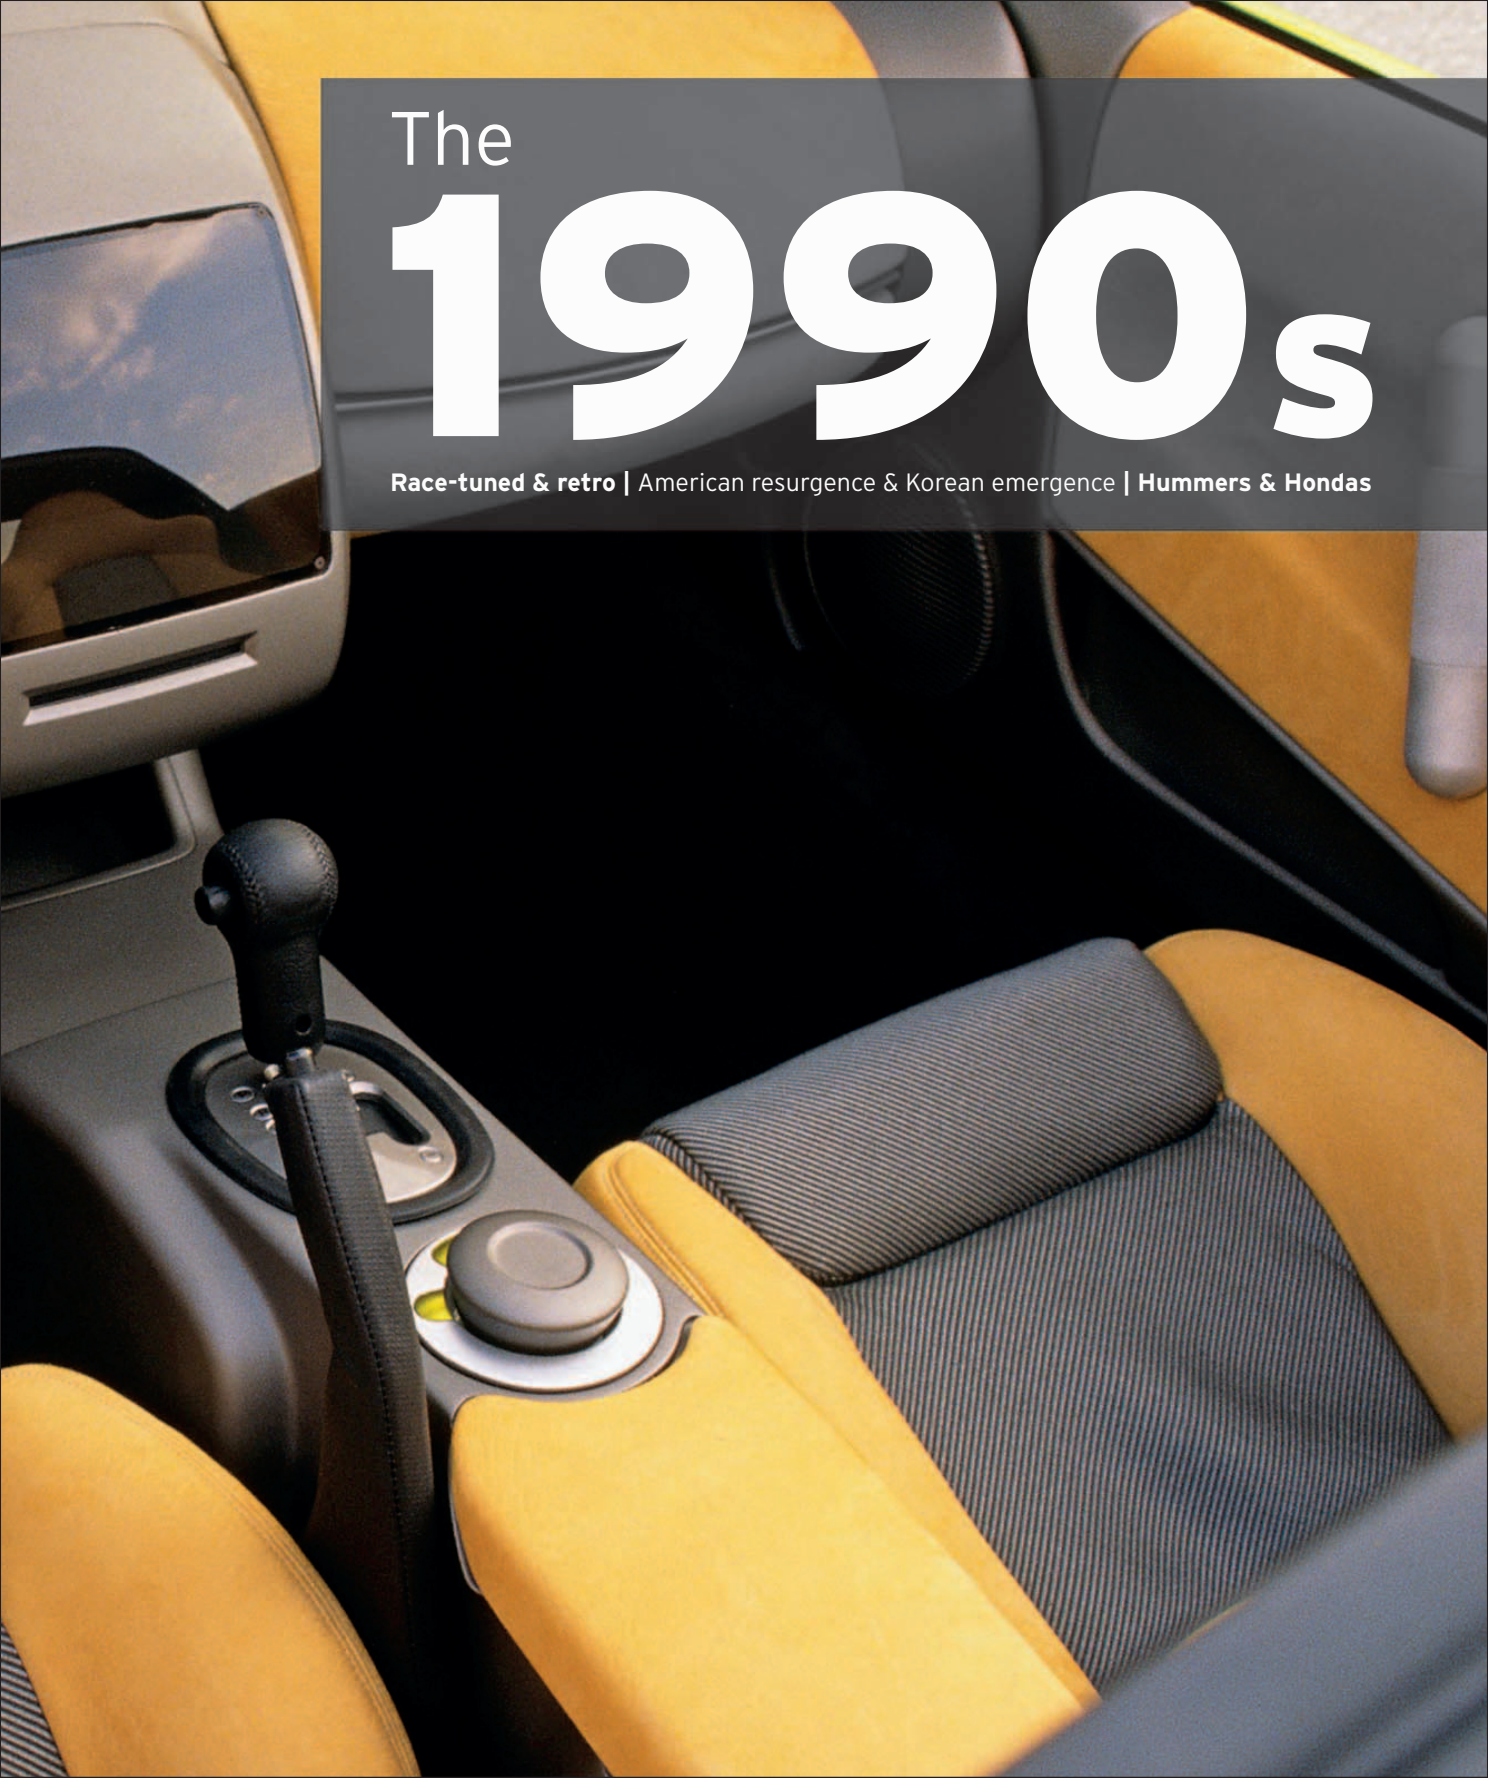 Car%20-%20The%20Definitive%20Visual%20History%20of%20the%20Automobile_281.png